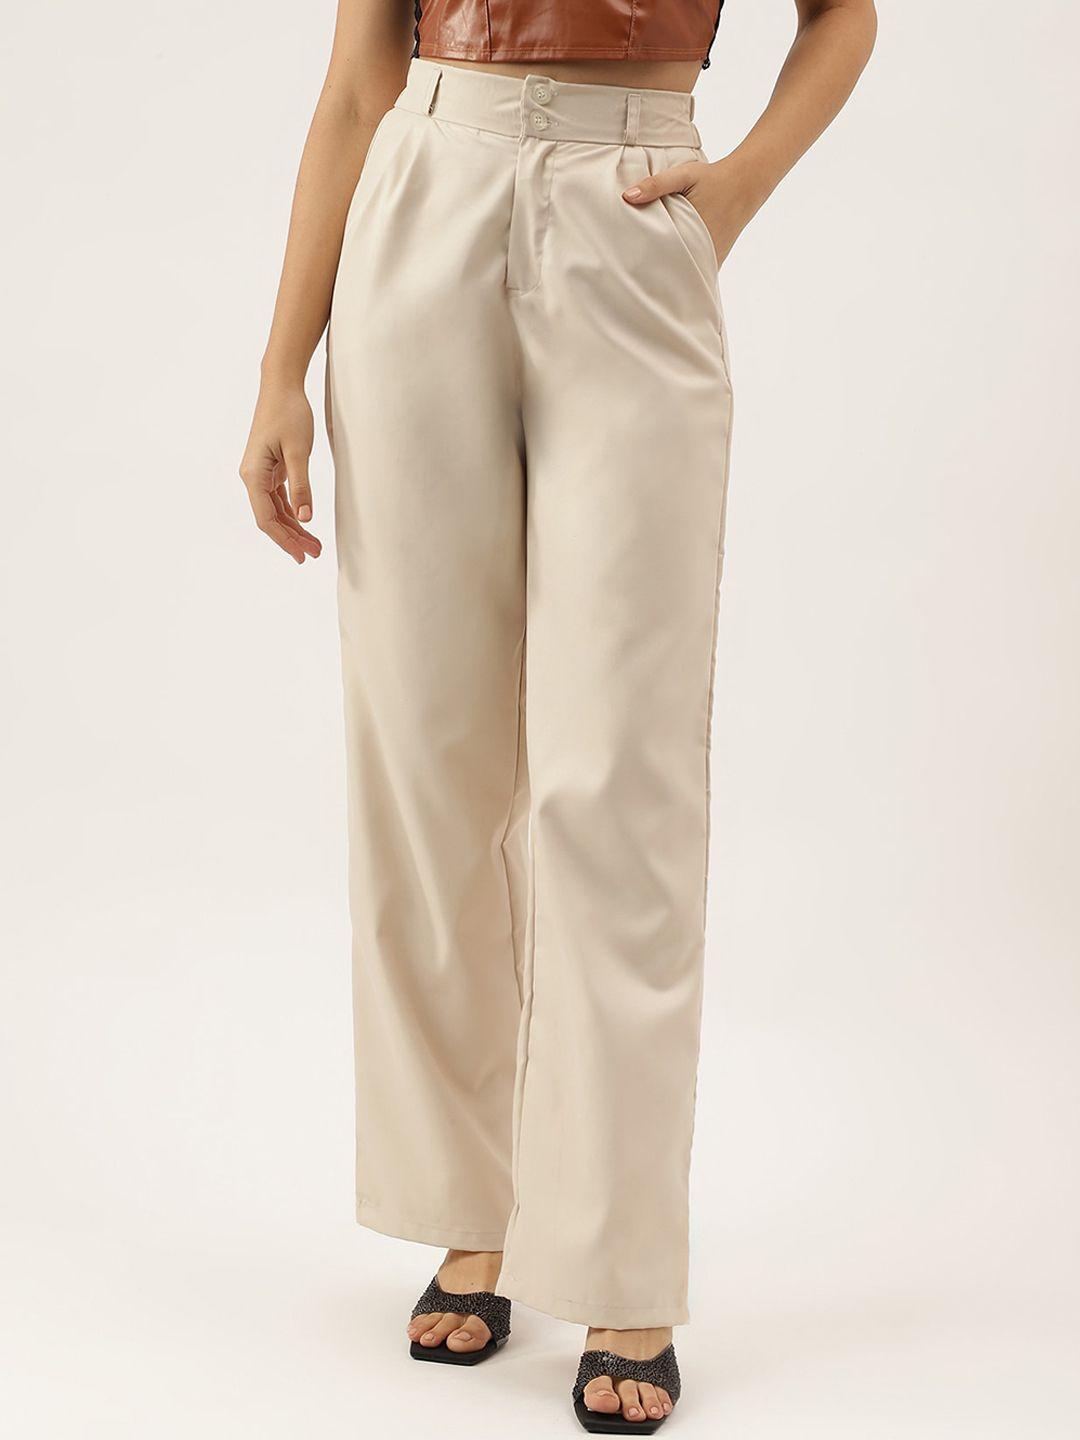 AAHWAN Women Cream-Coloured Loose Fit High-Rise Pleated Trousers